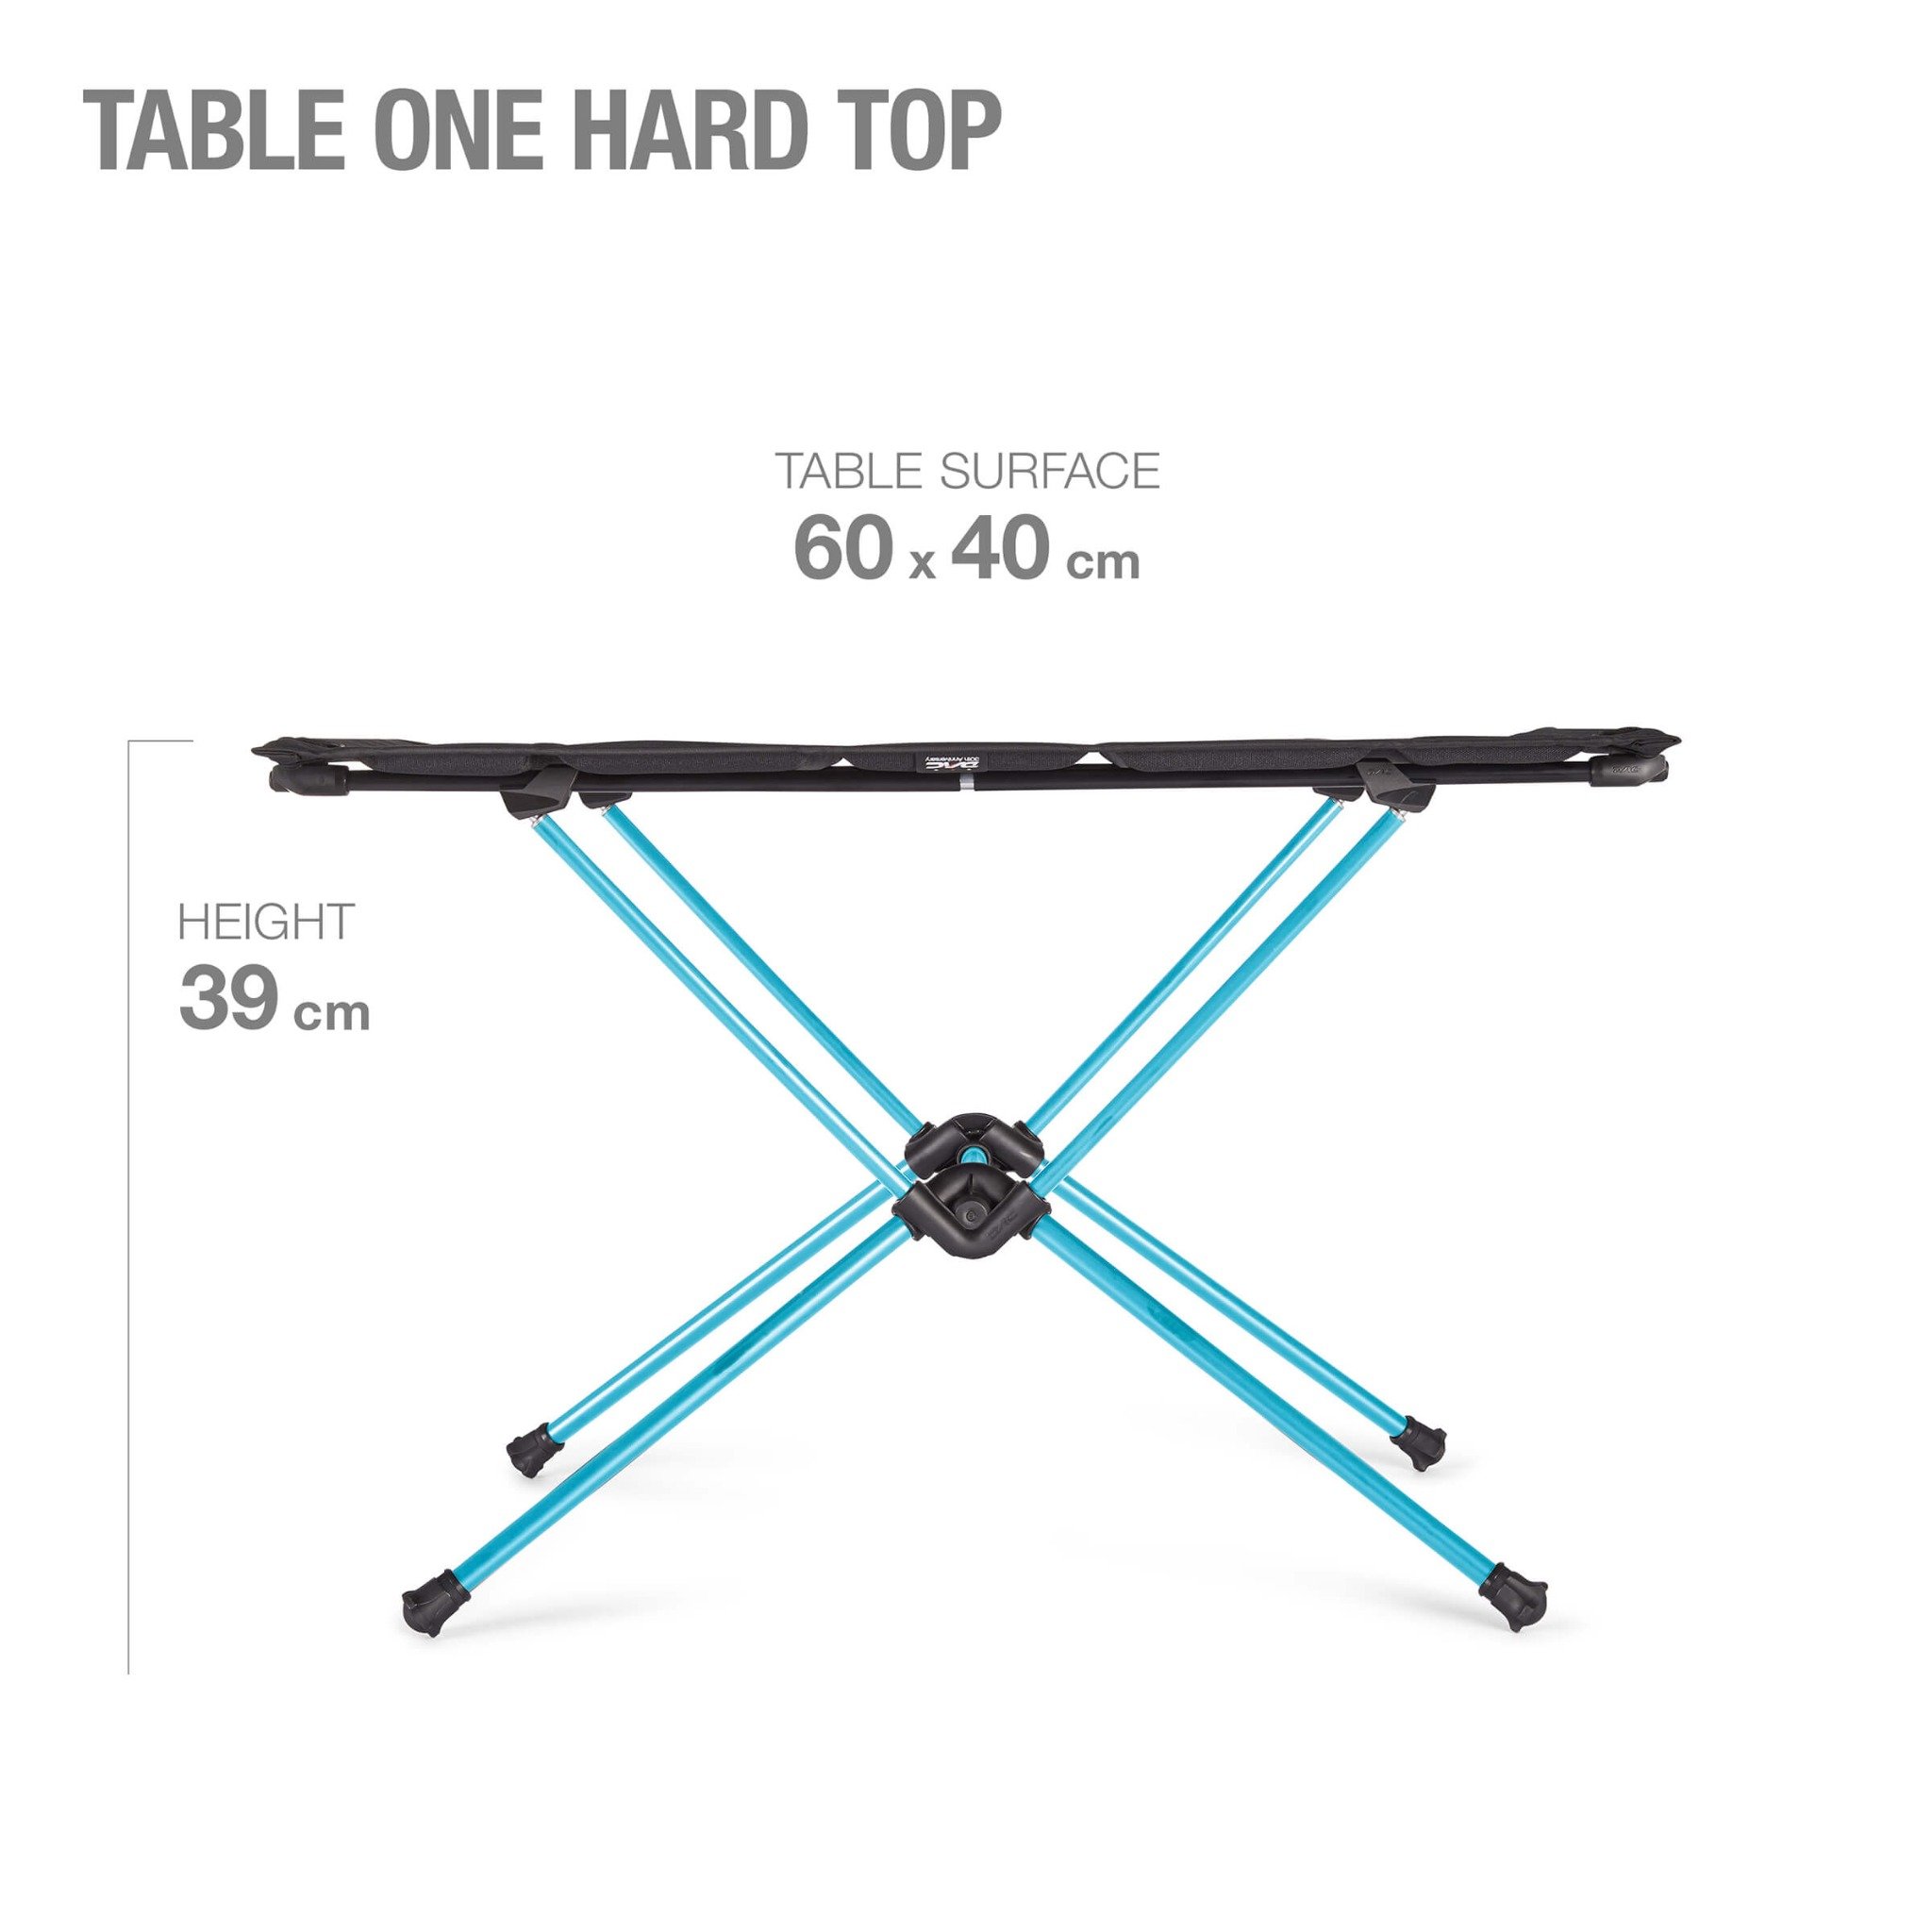 Table One Hard Top